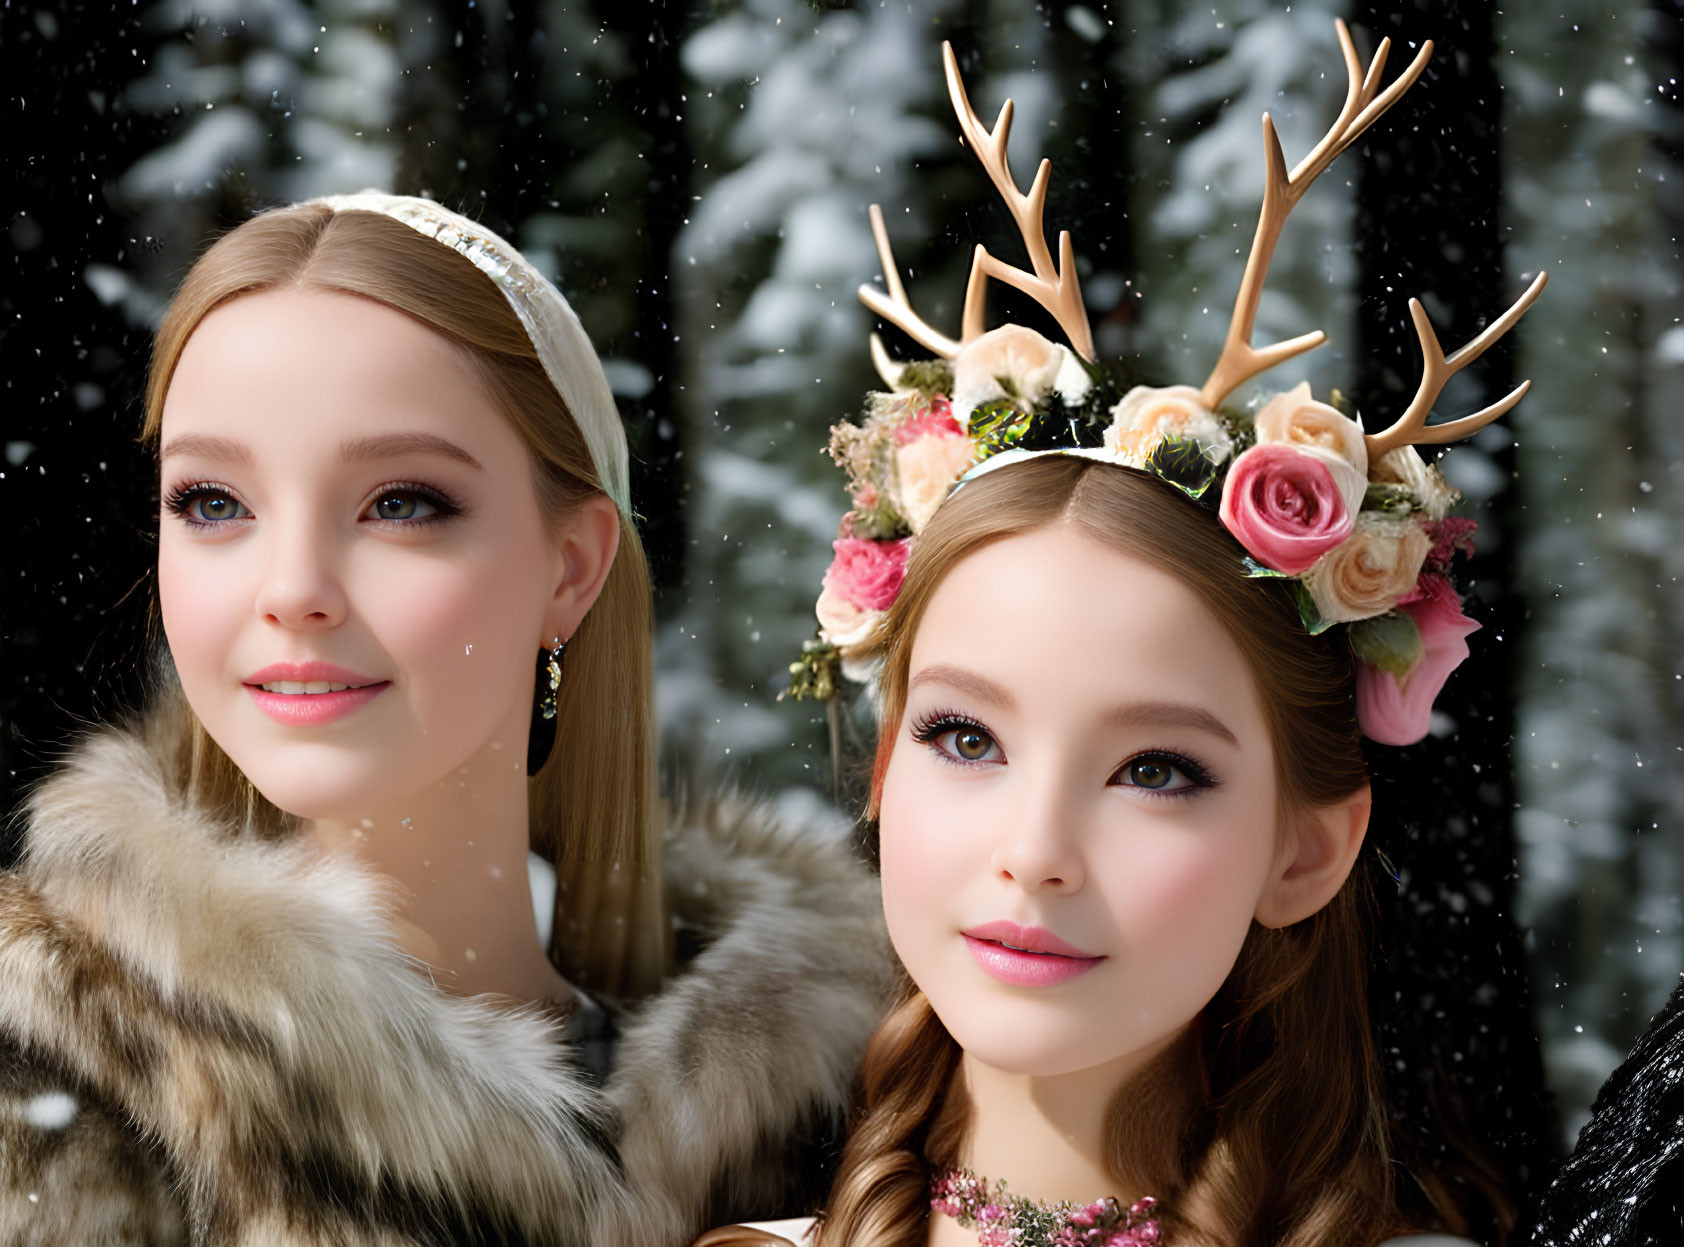 Women in elaborate antler headpieces with floral decorations in snowy setting